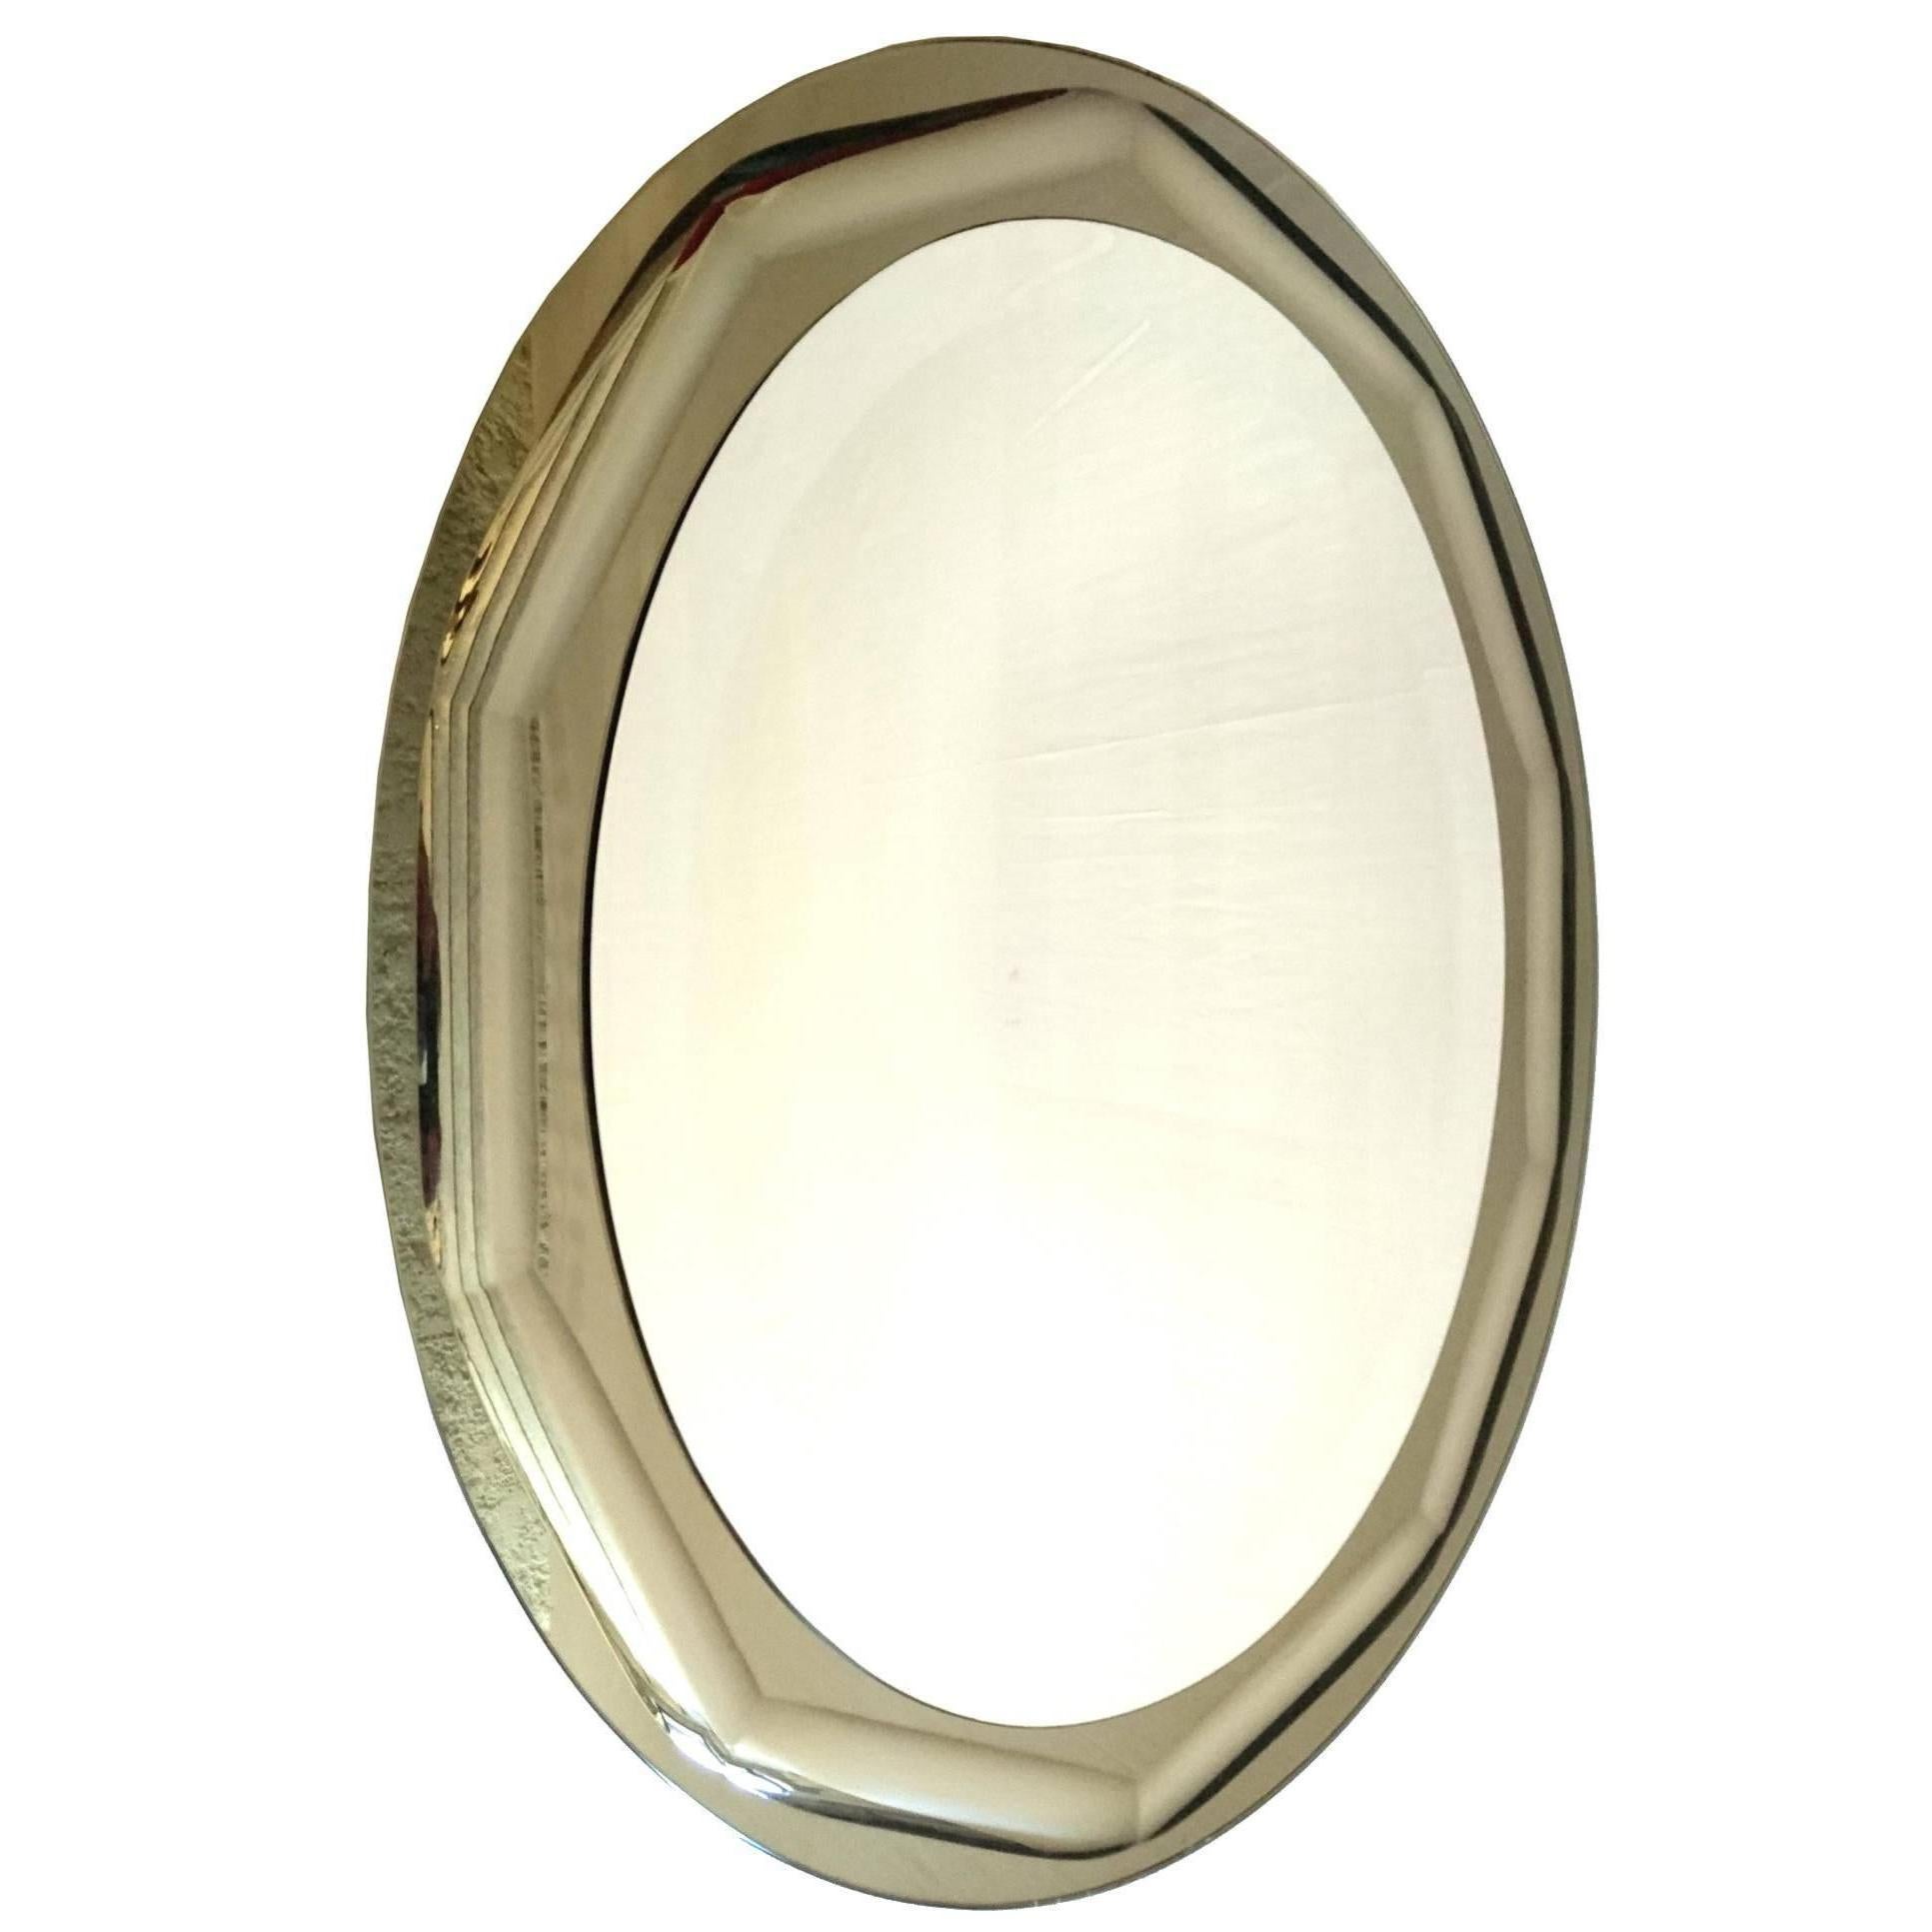 Oval Mirror by Lupi Cristal-Luxor, Italy